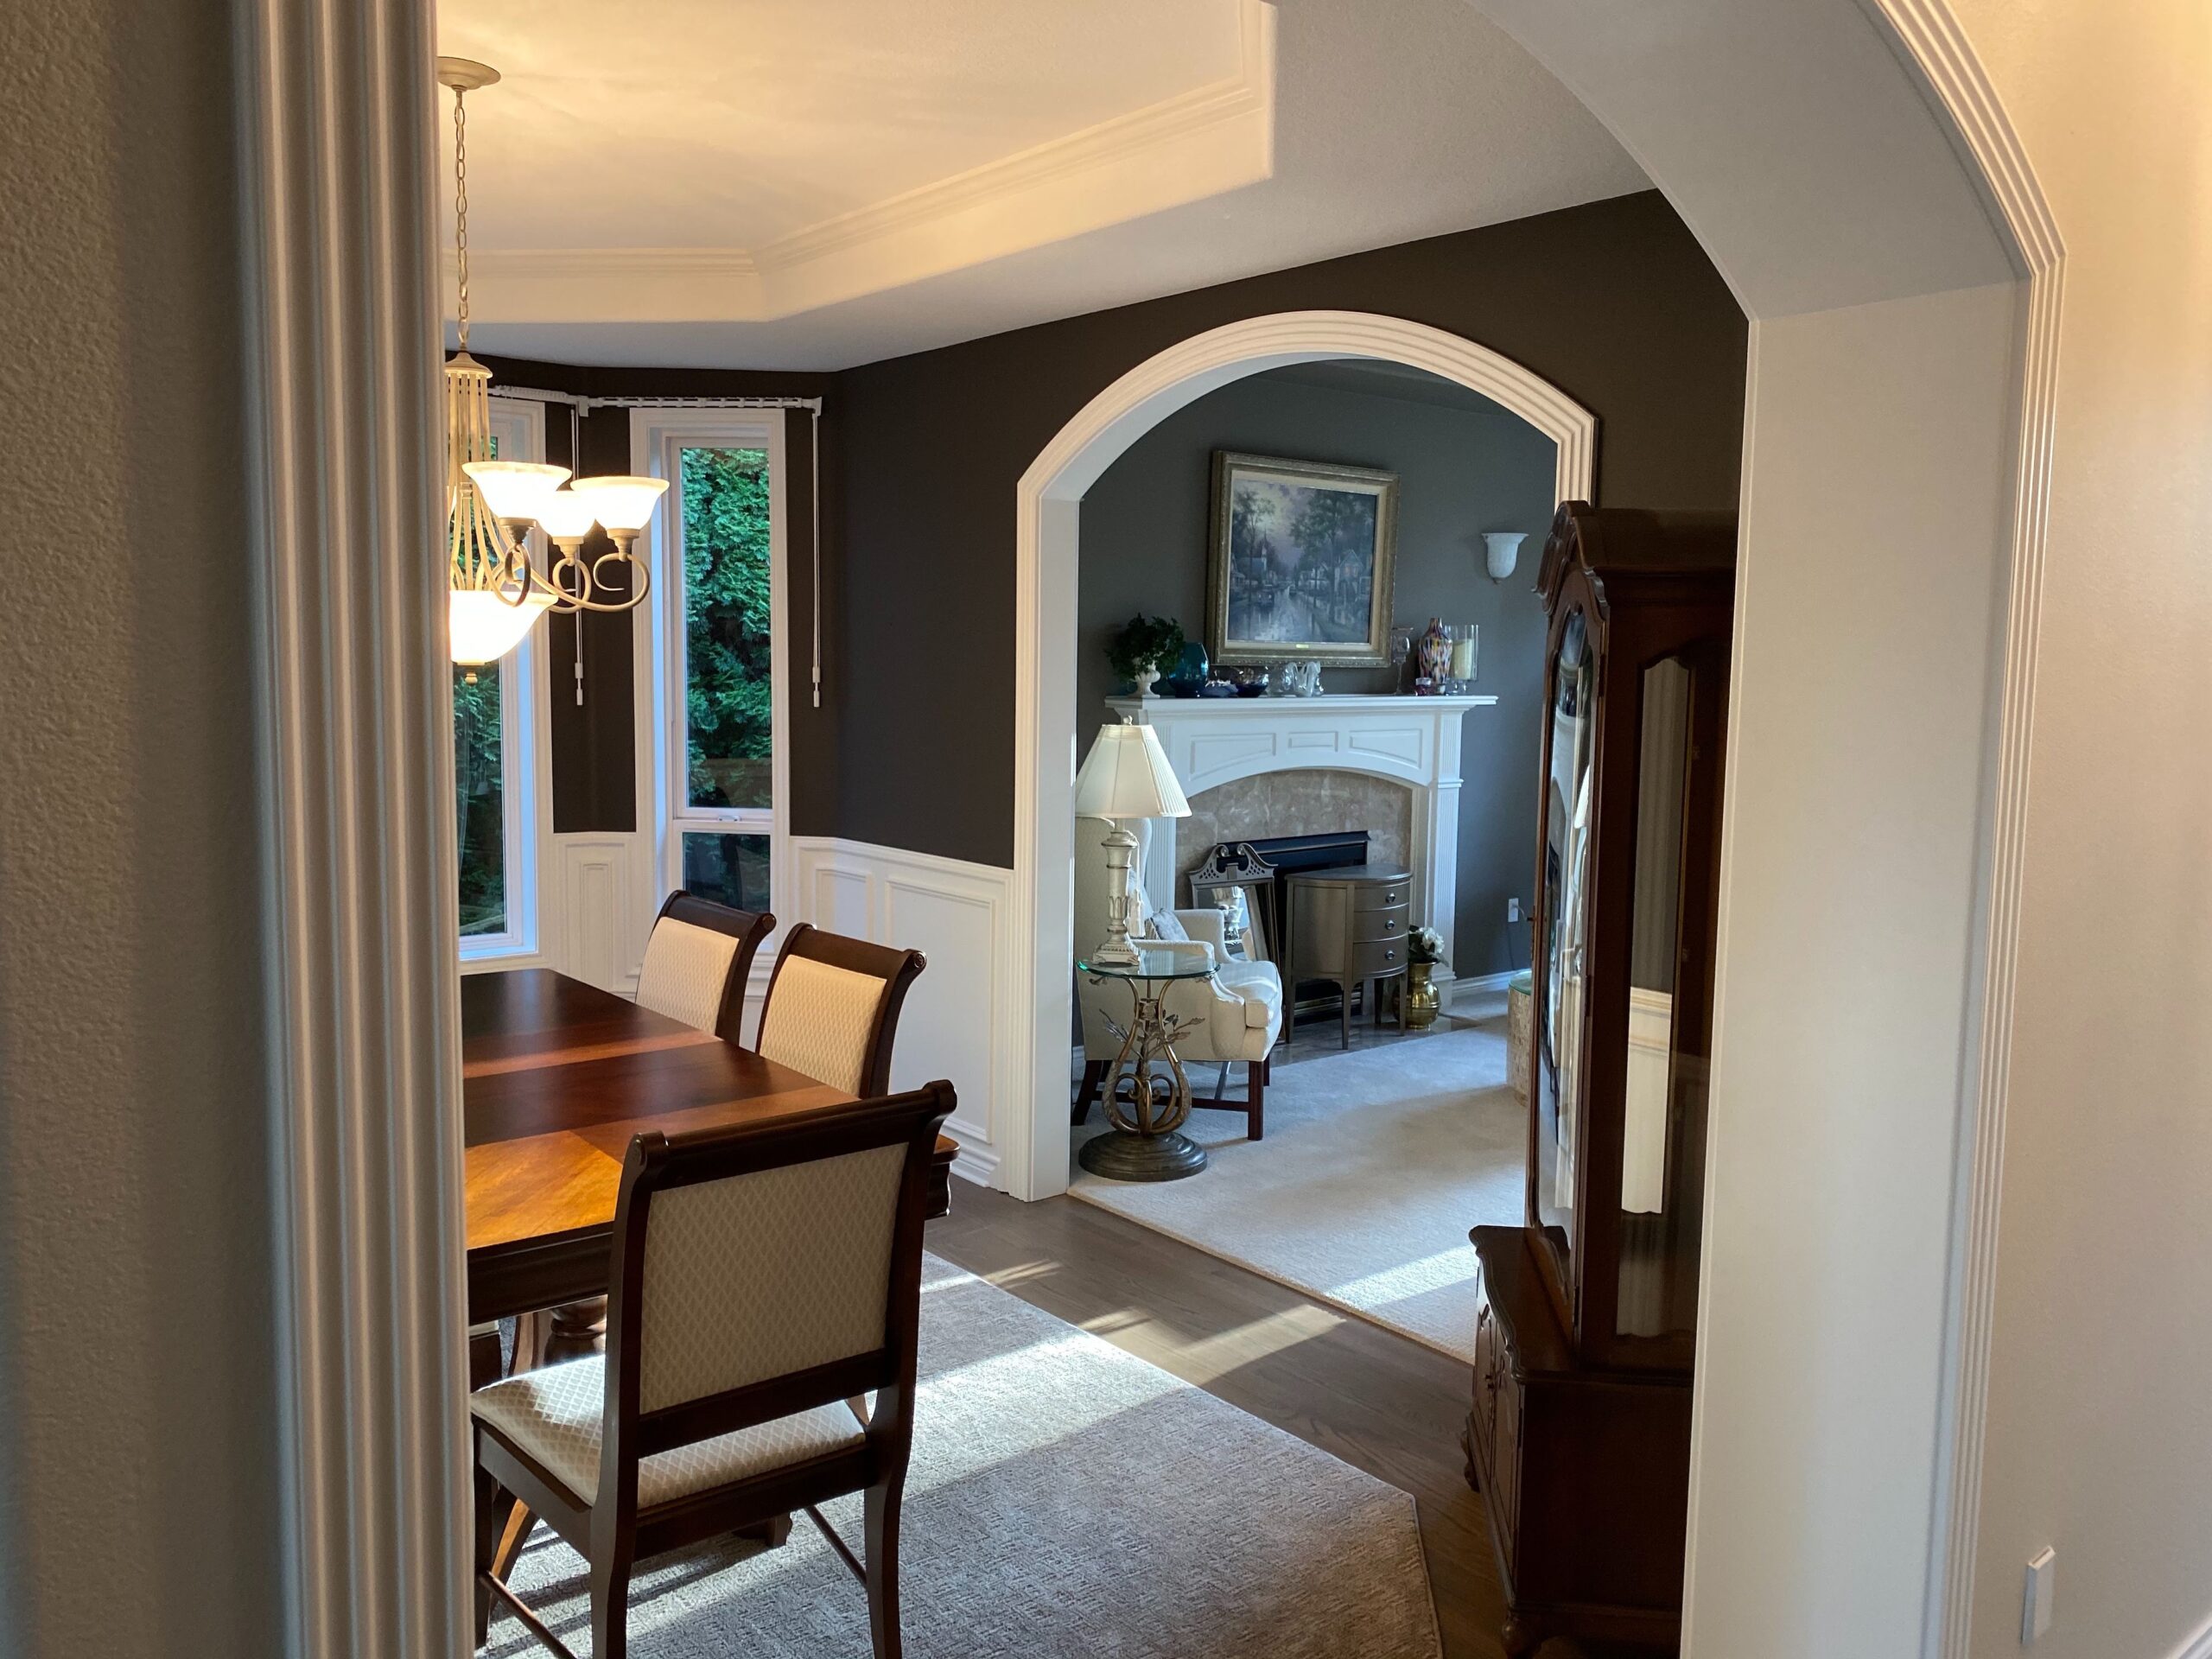 A holiday-ready archway leads to a home dining room.